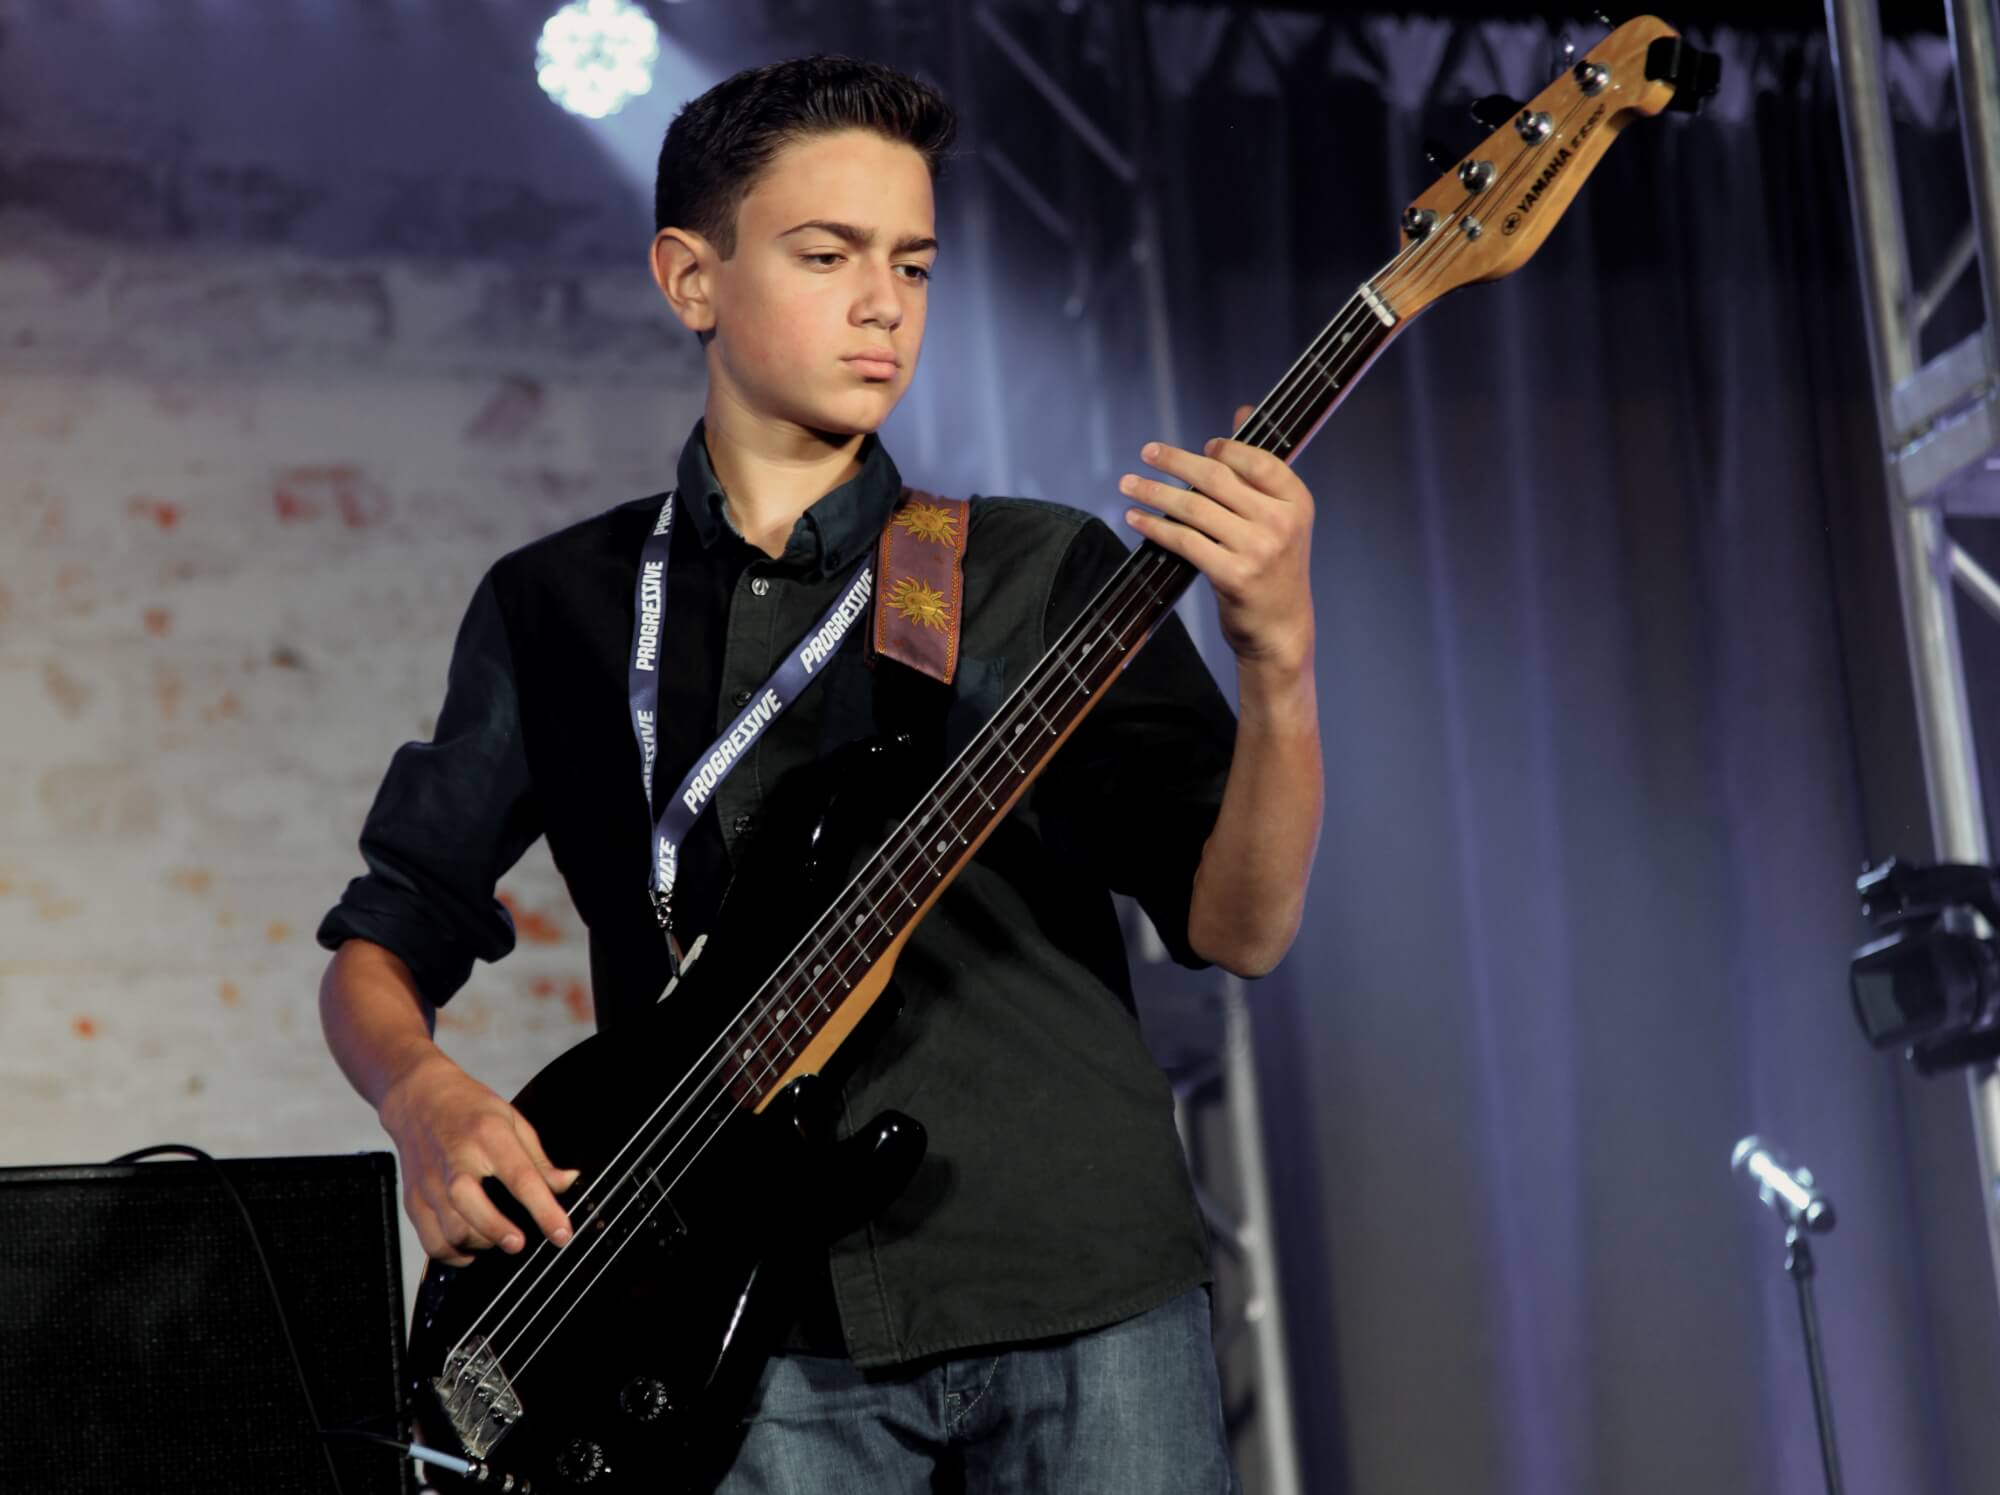 One of our students plays the bass.